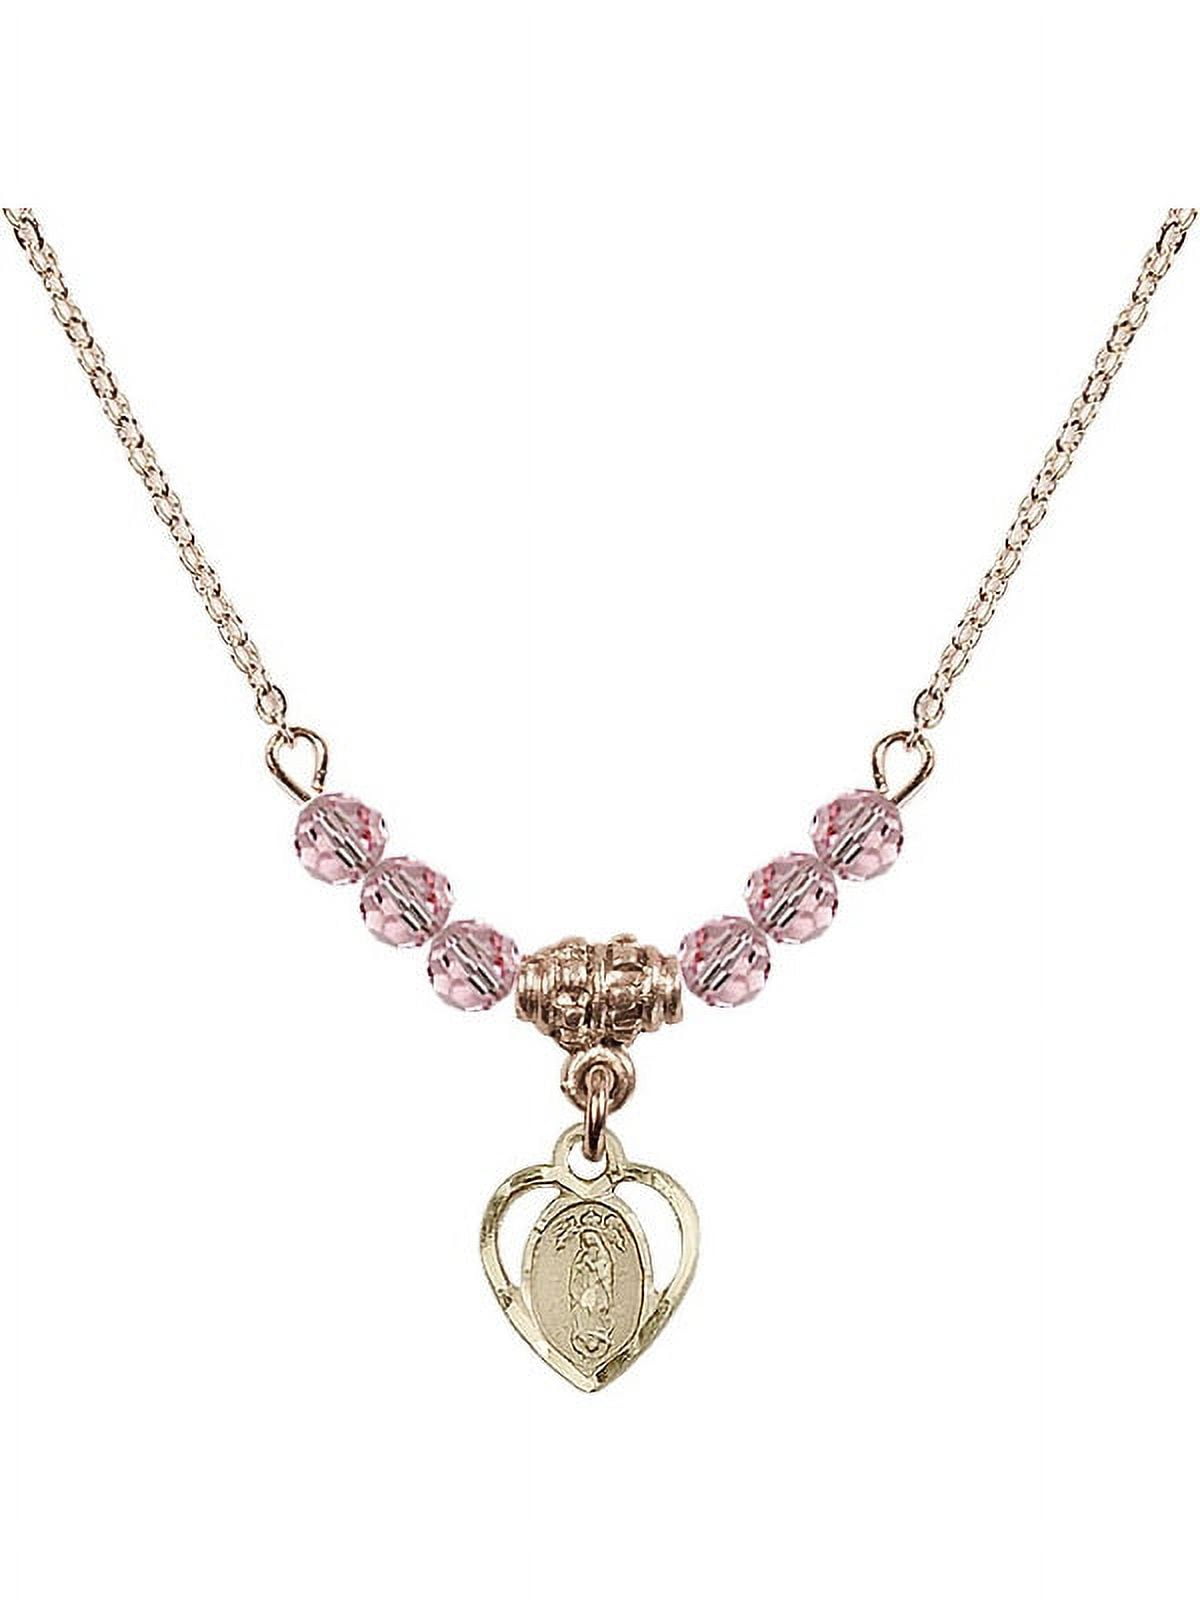 18-Inch Hamilton Gold Plated Necklace w/ 4mm Light Rose Pink October Birth  Month Stone Beads and Our Lady of Guadalupe Charm